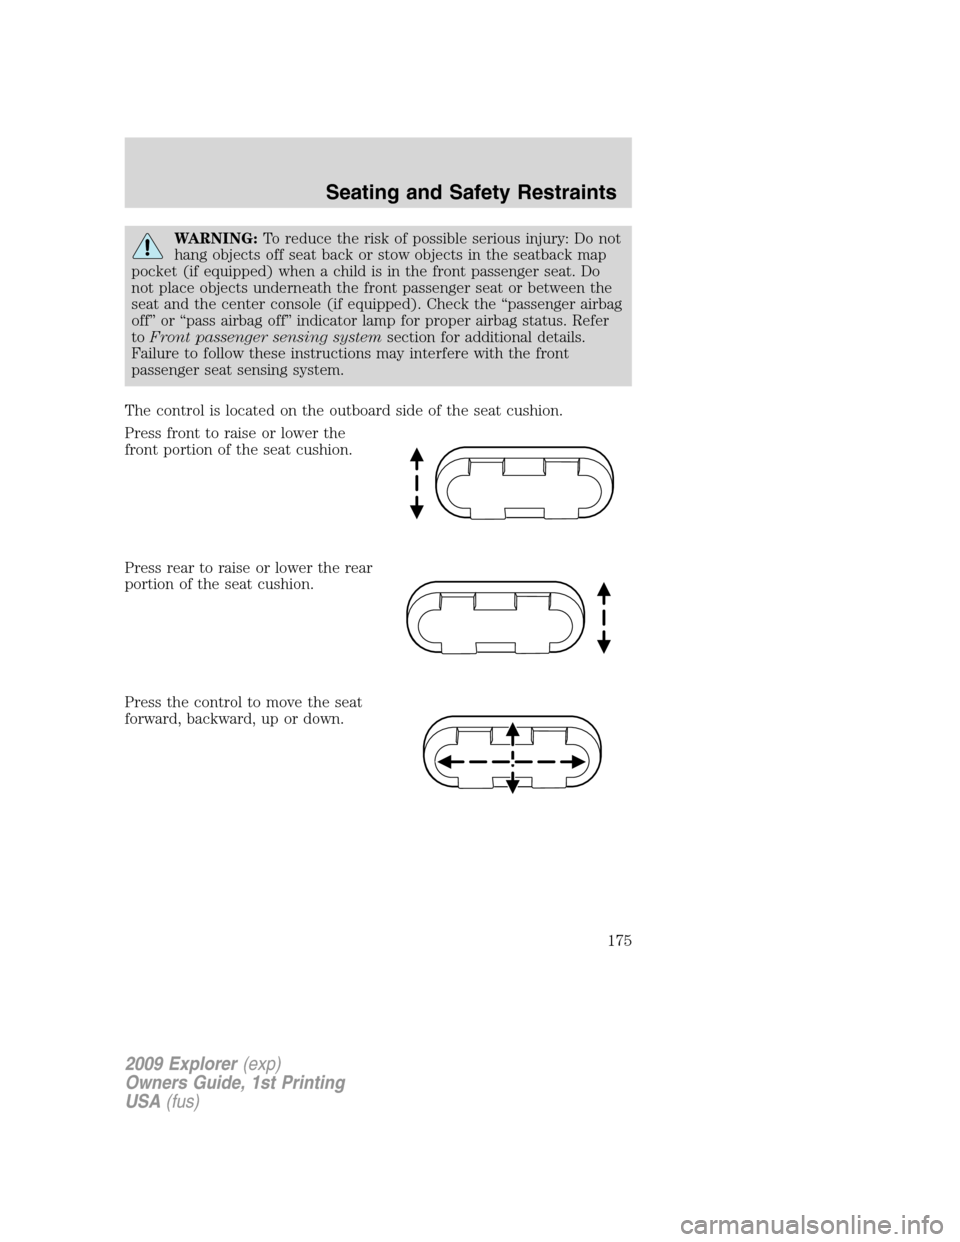 FORD EXPLORER 2009 4.G Owners Manual WARNING:To reduce the risk of possible serious injury: Do not
hang objects off seat back or stow objects in the seatback map
pocket (if equipped) when a child is in the front passenger seat. Do
not pl